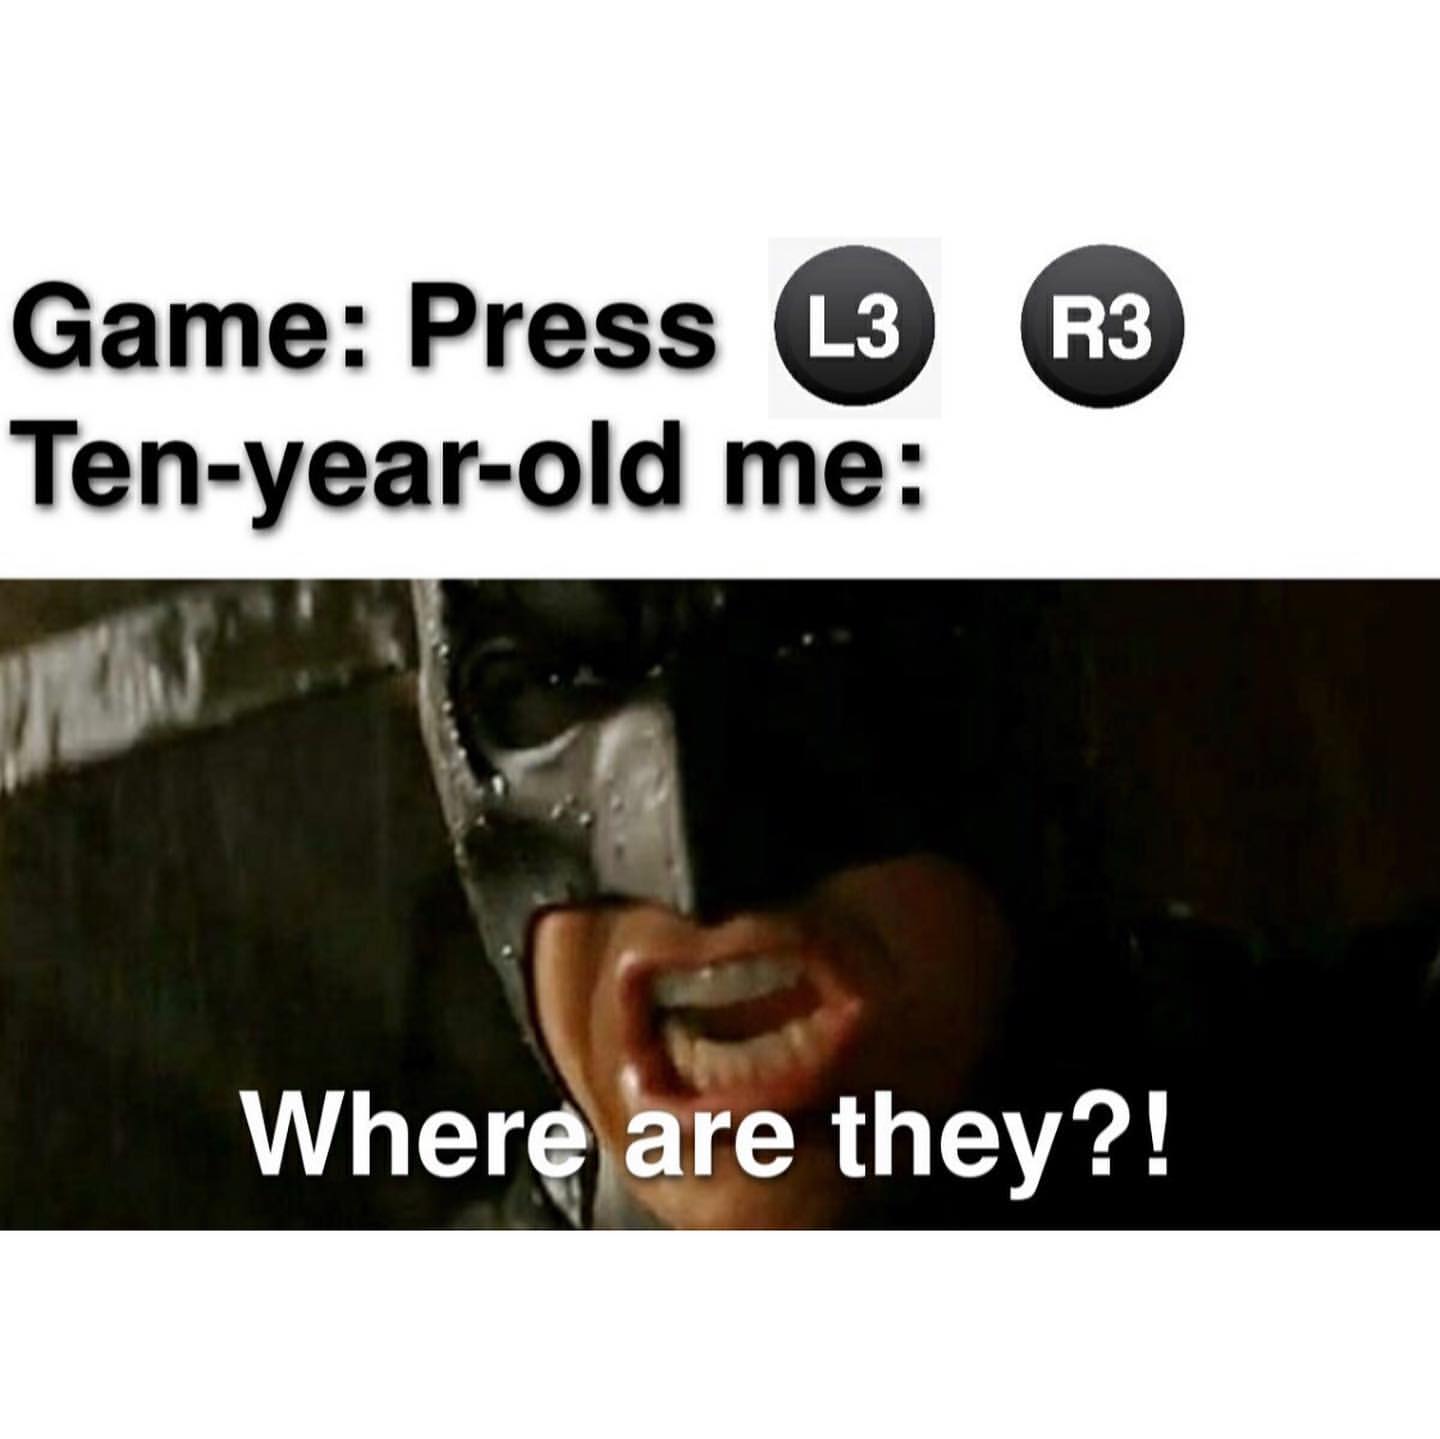 Game: Press. Ten-year-old me: Where are they?!